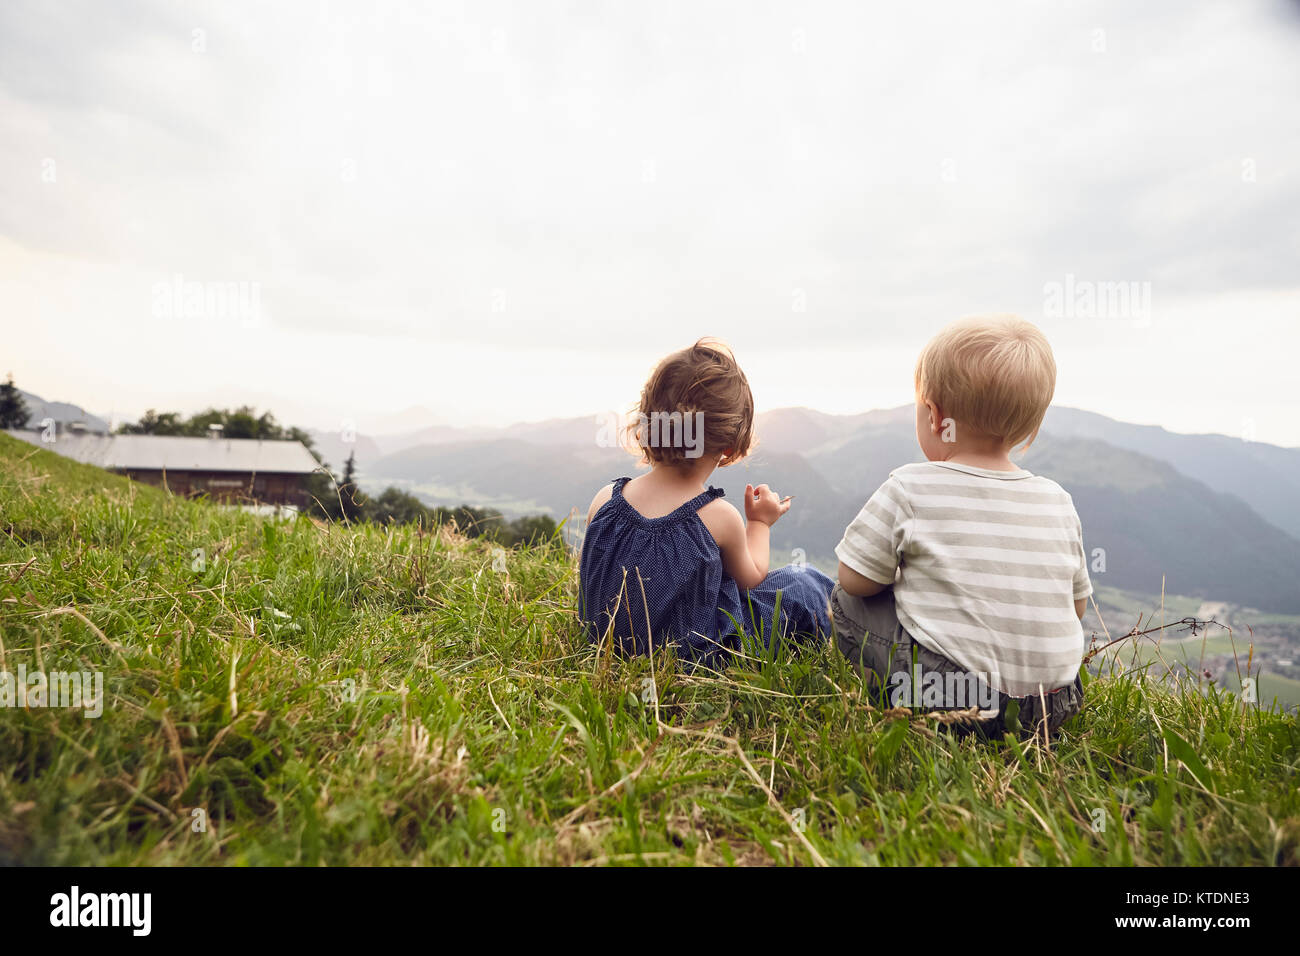 Austria, Tyrol, back view of little girl and boy sitting on Alpine meadow looking at view Stock Photo